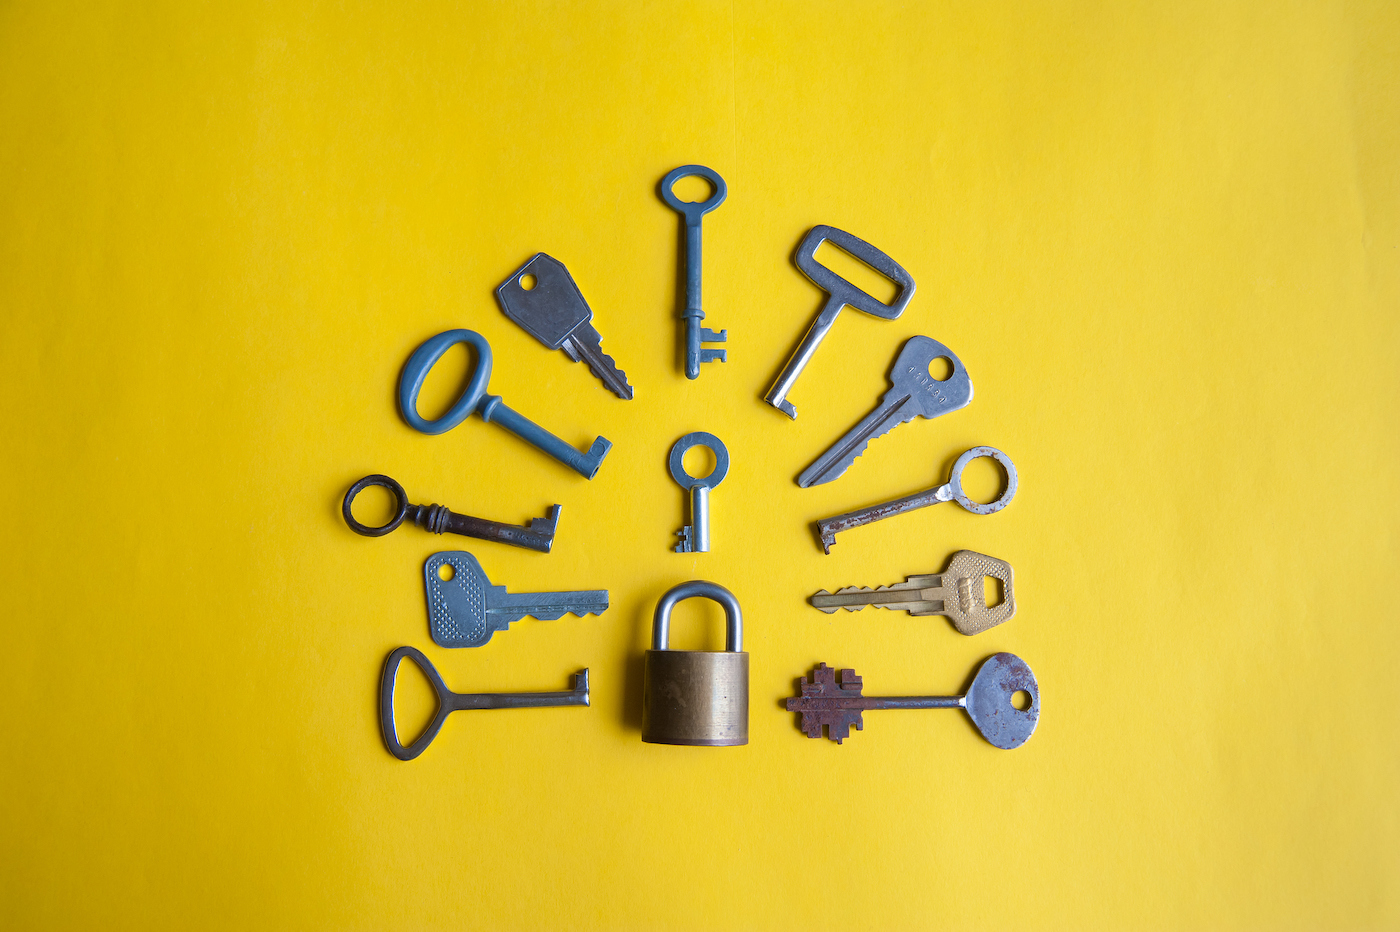 One lock and many different keys lie on a yellow background